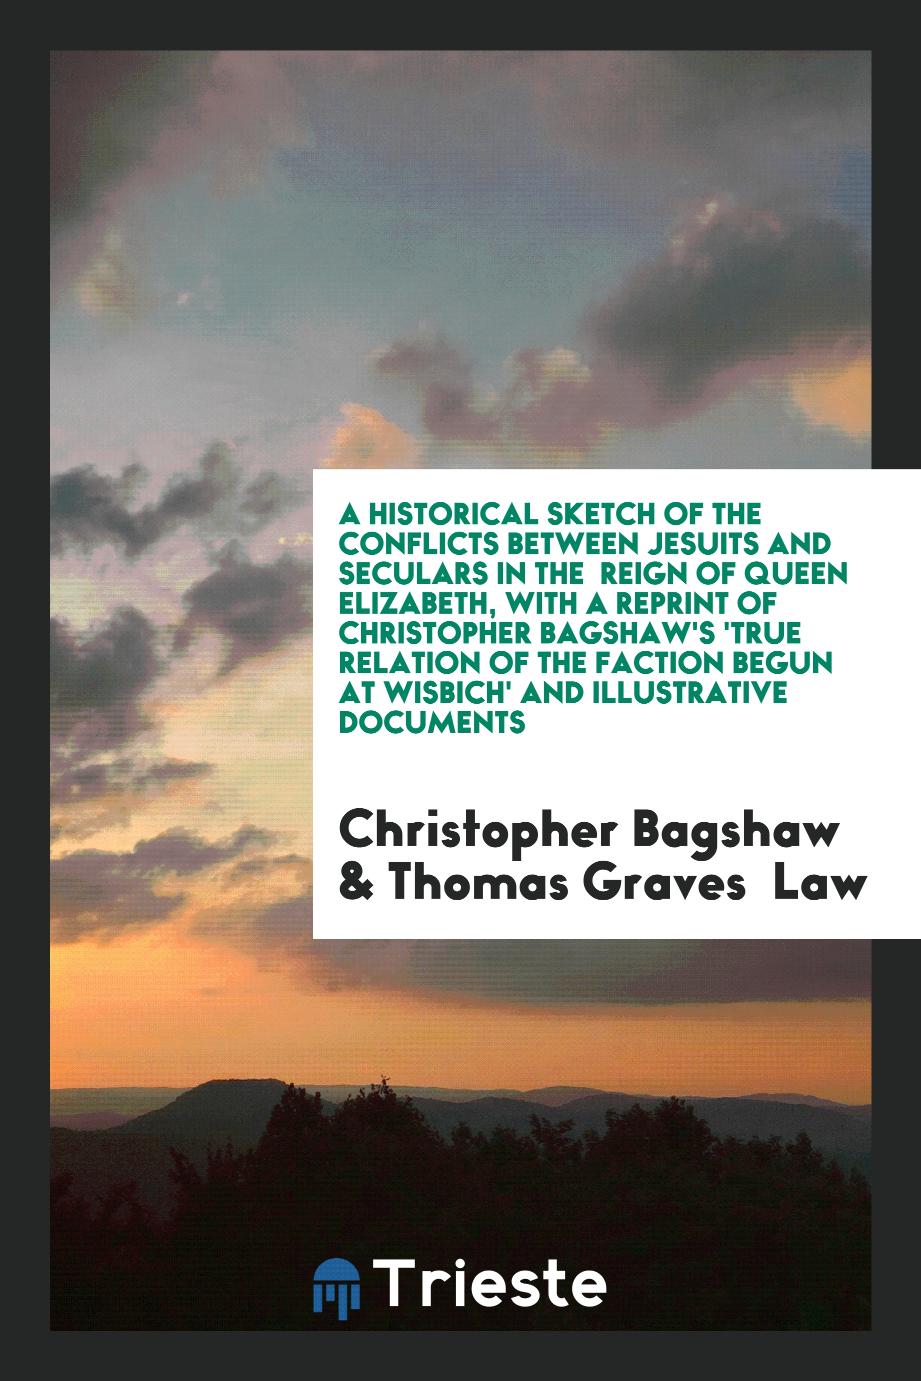 A Historical Sketch of the Conflicts Between Jesuits and Seculars in the Reign of Queen Elizabeth, with a Reprint of Christopher Bagshaw's 'True Relation of the Faction Begun at Wisbich' and Illustrative Documents